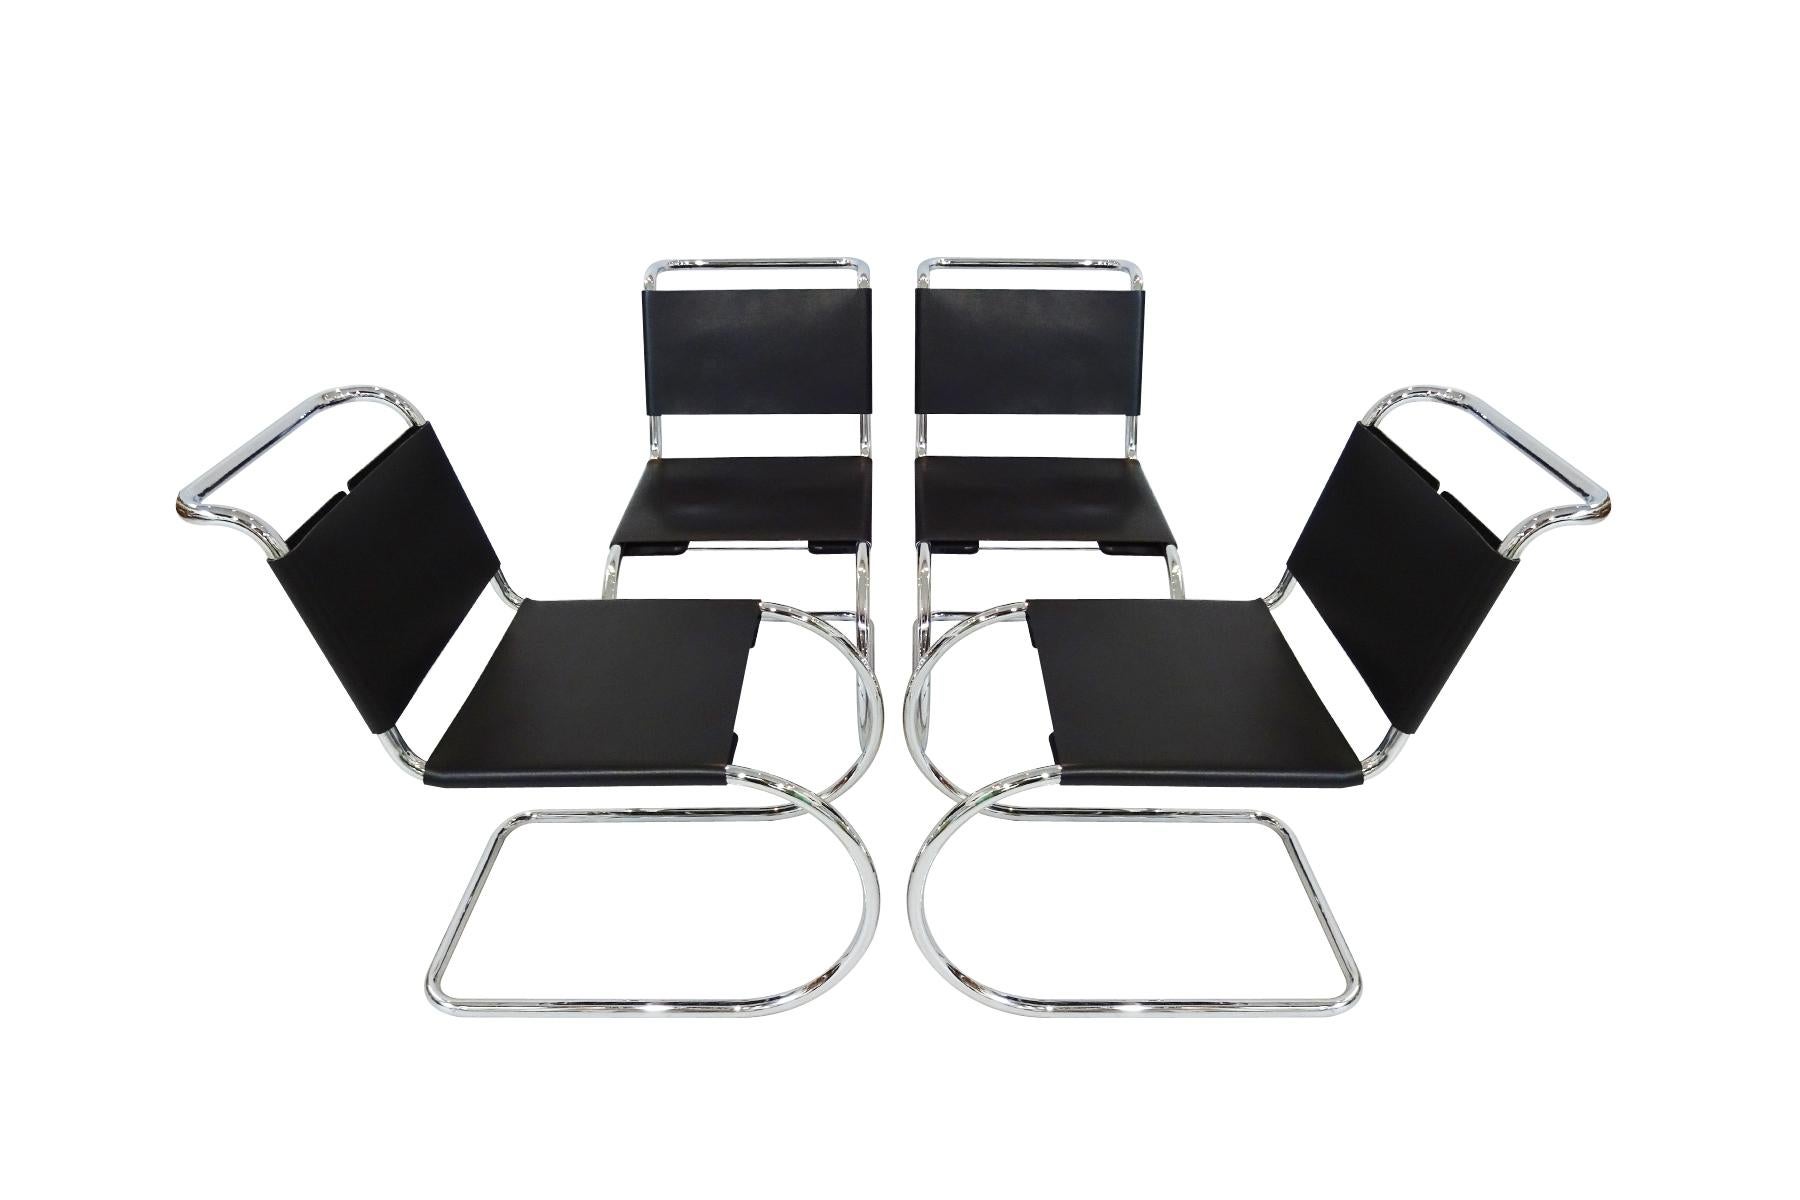 American Dining set - Knoll International Mies Van Der Rohe Mr10 Chairs and Mz59 Table